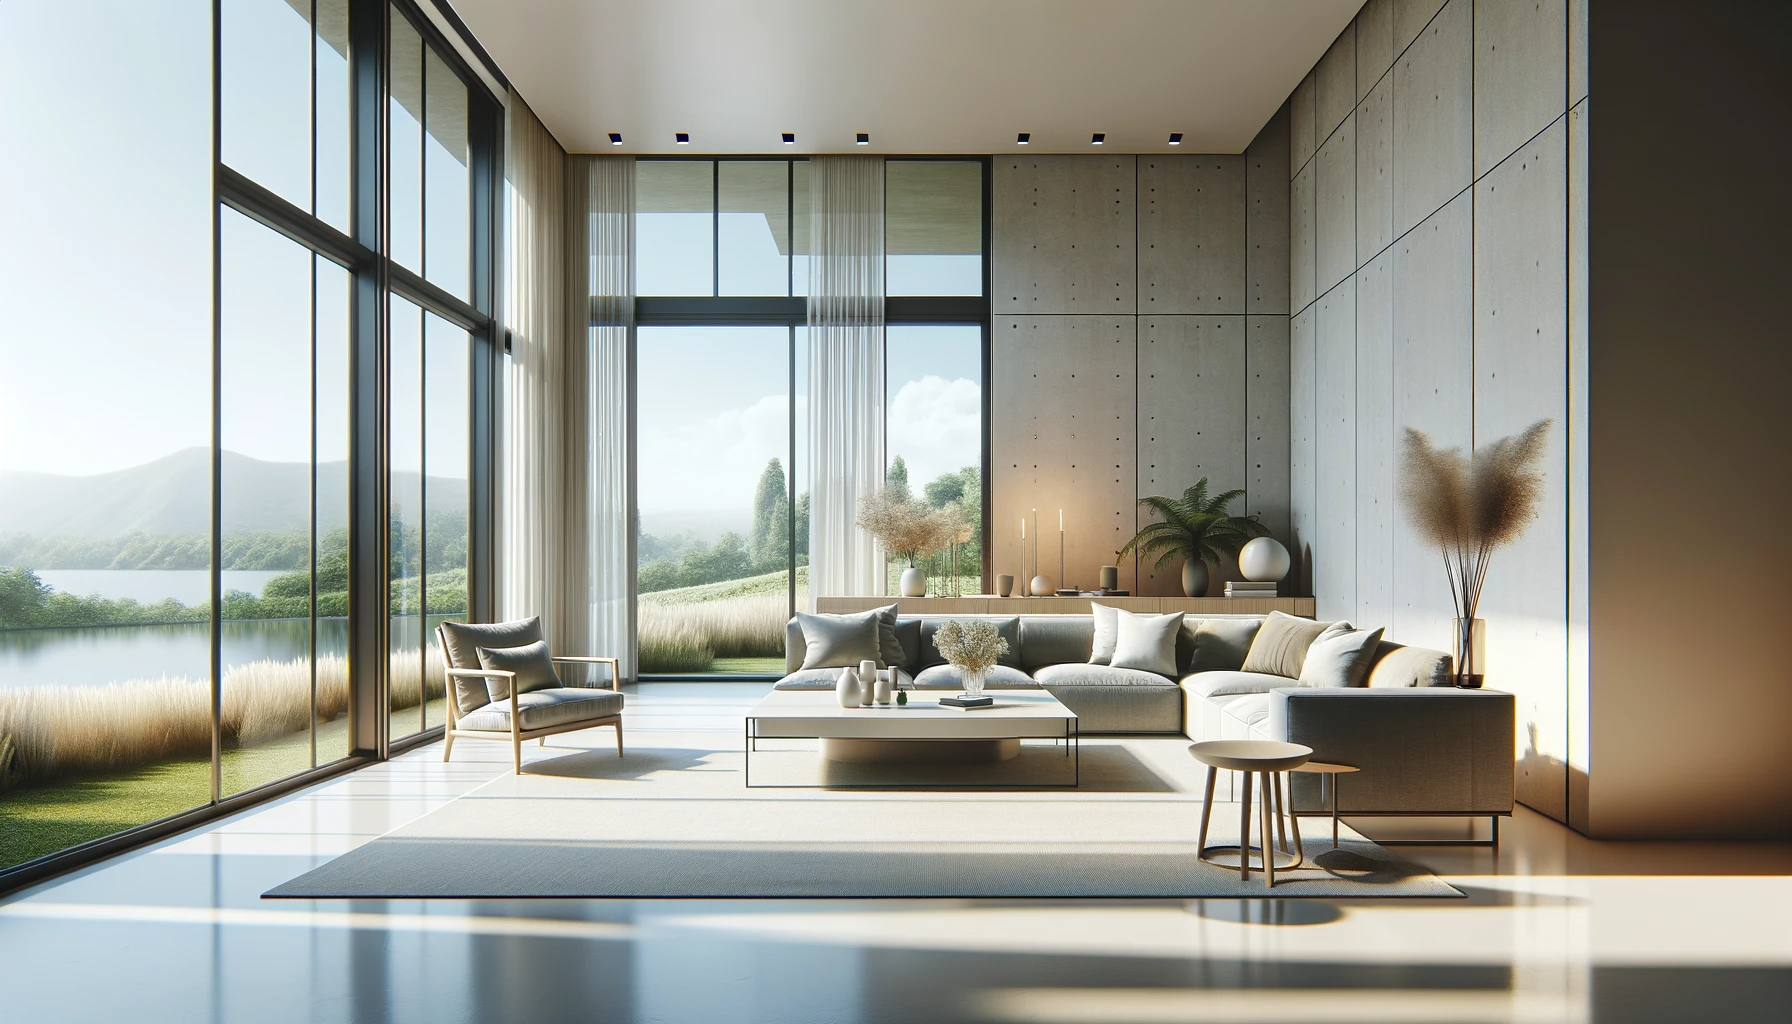 A bright and airy modern living room with large windows offering a stunning view of the landscape.